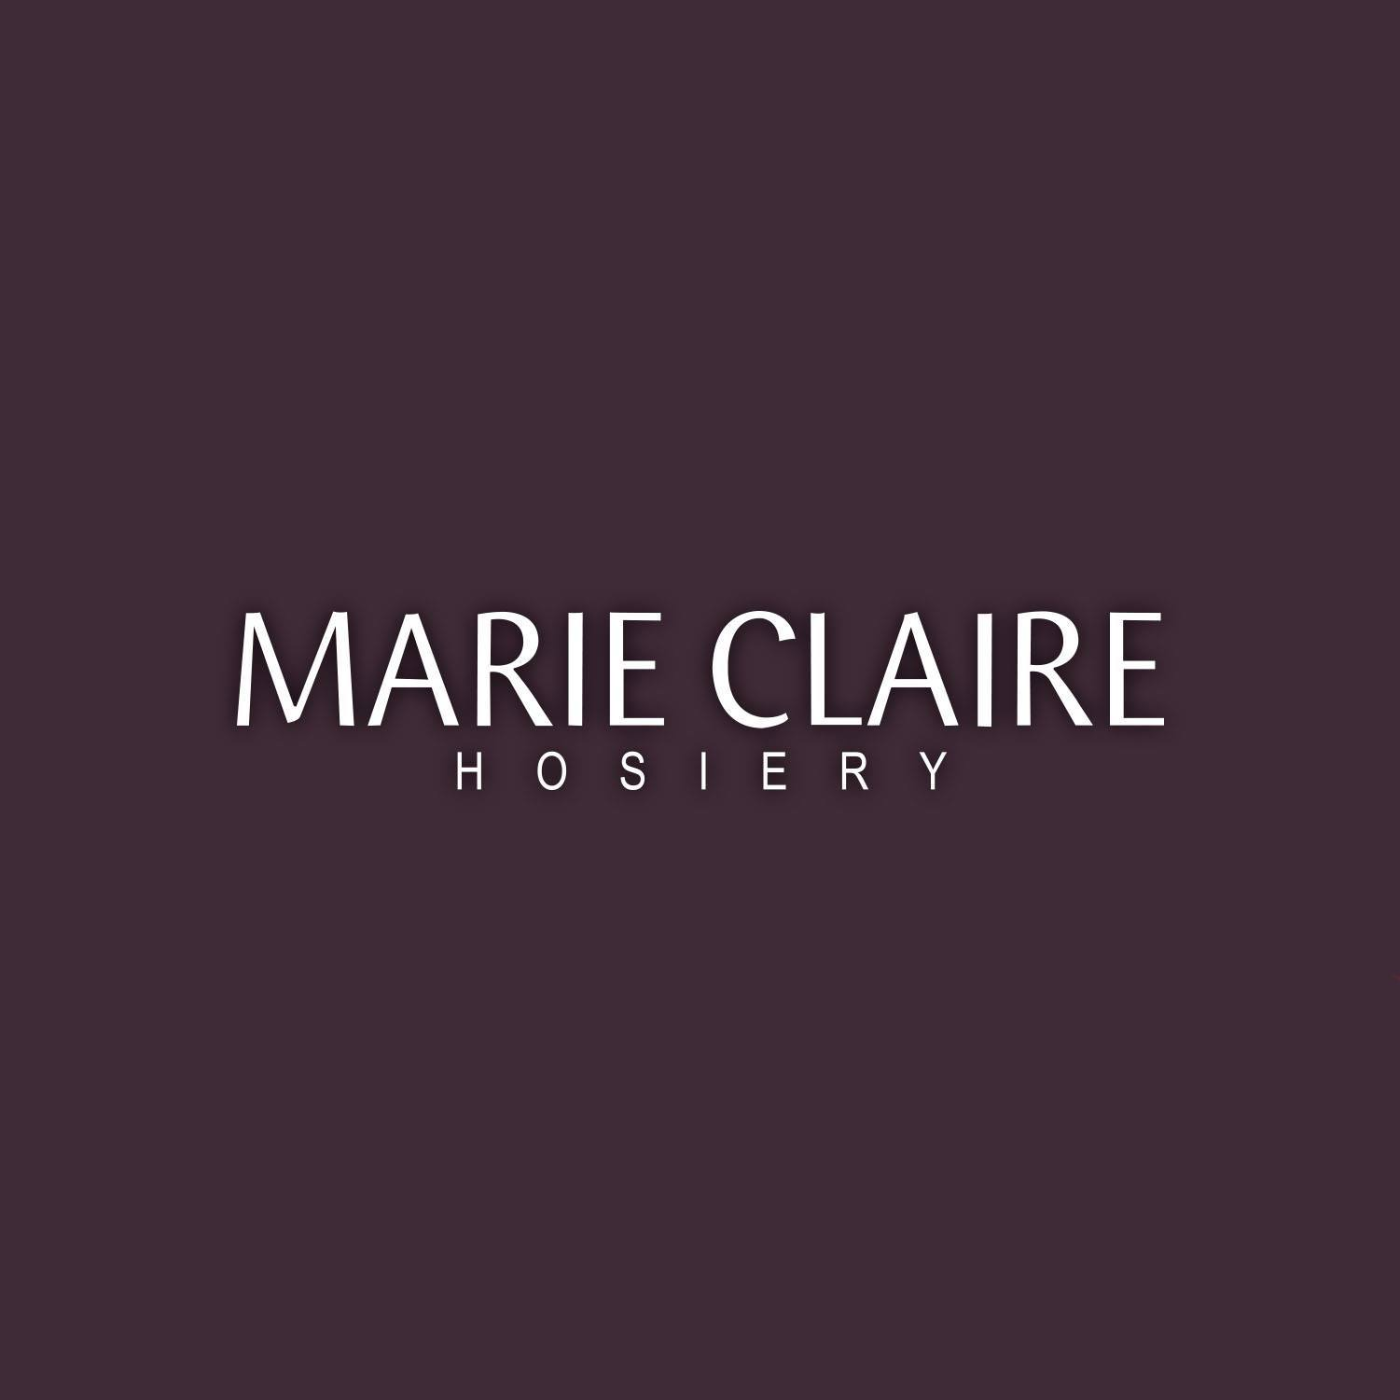 Marie Claire Hosiery